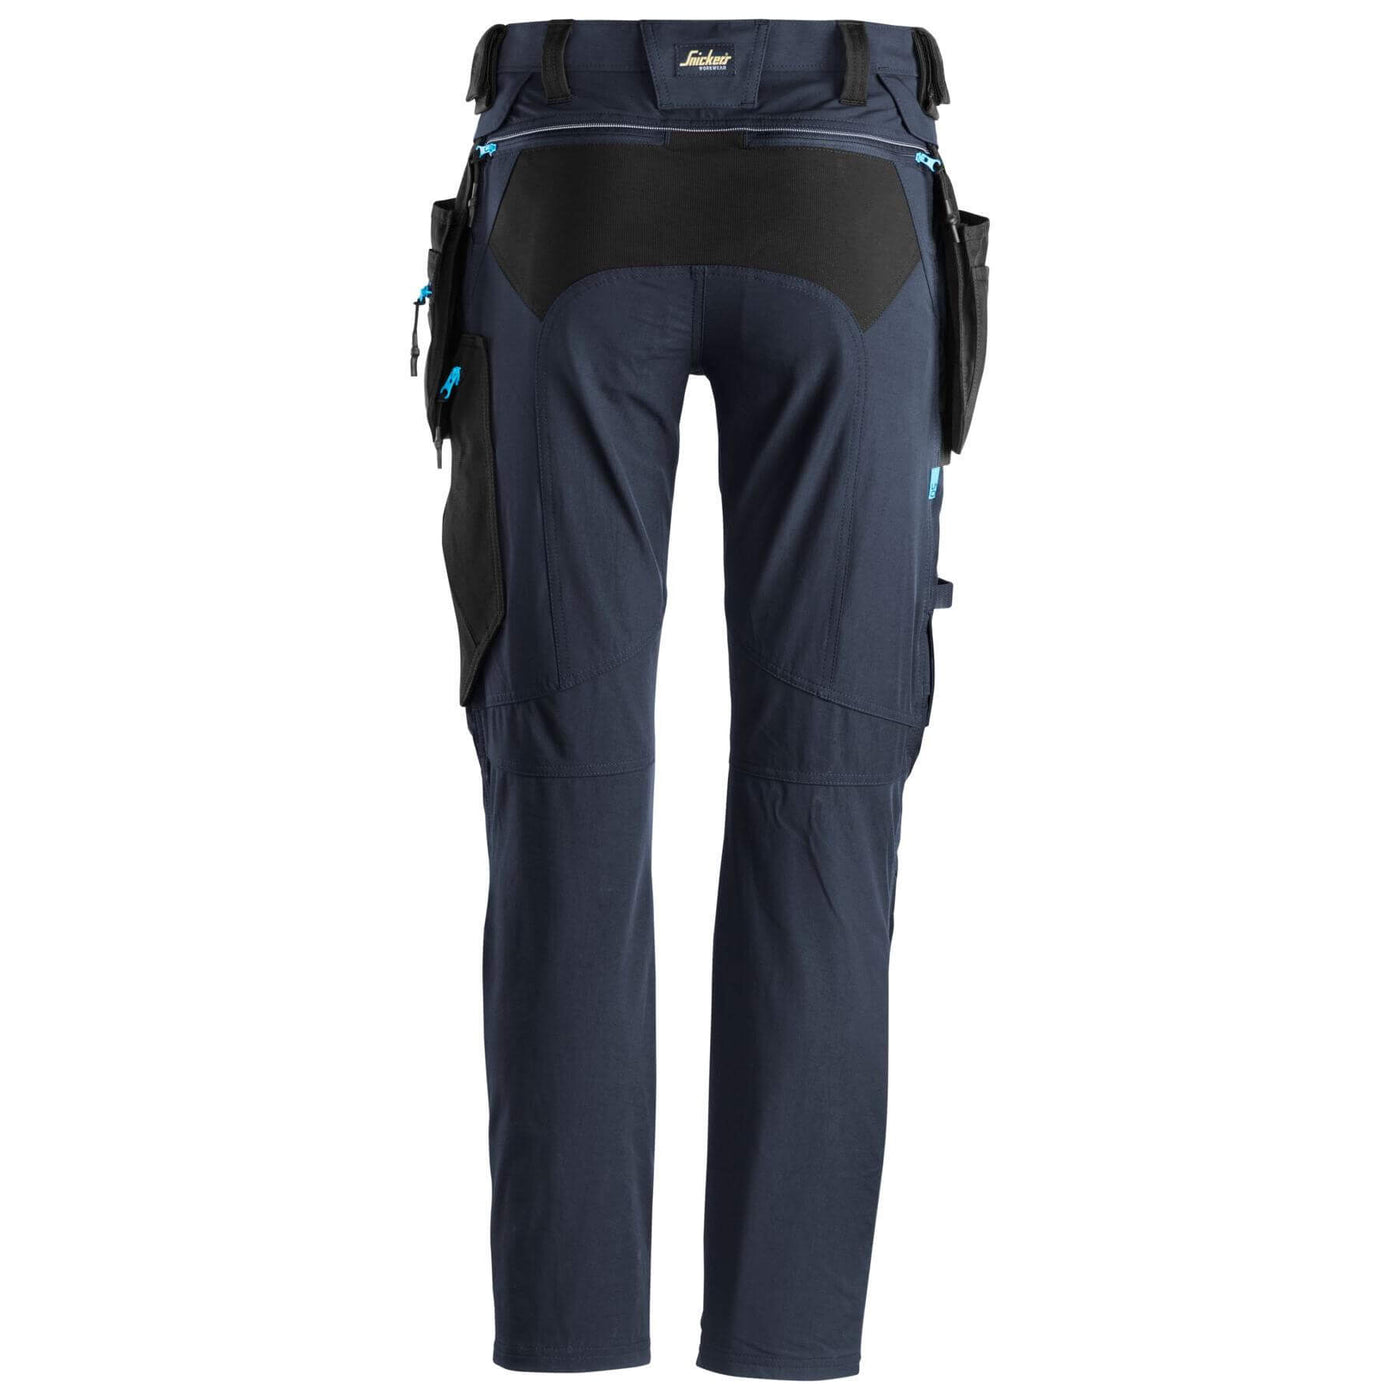 Snickers 6208 LiteWork Lightweight Slim Fit Trousers with Detachable Holster Pockets Navy Black back #colour_navy-black